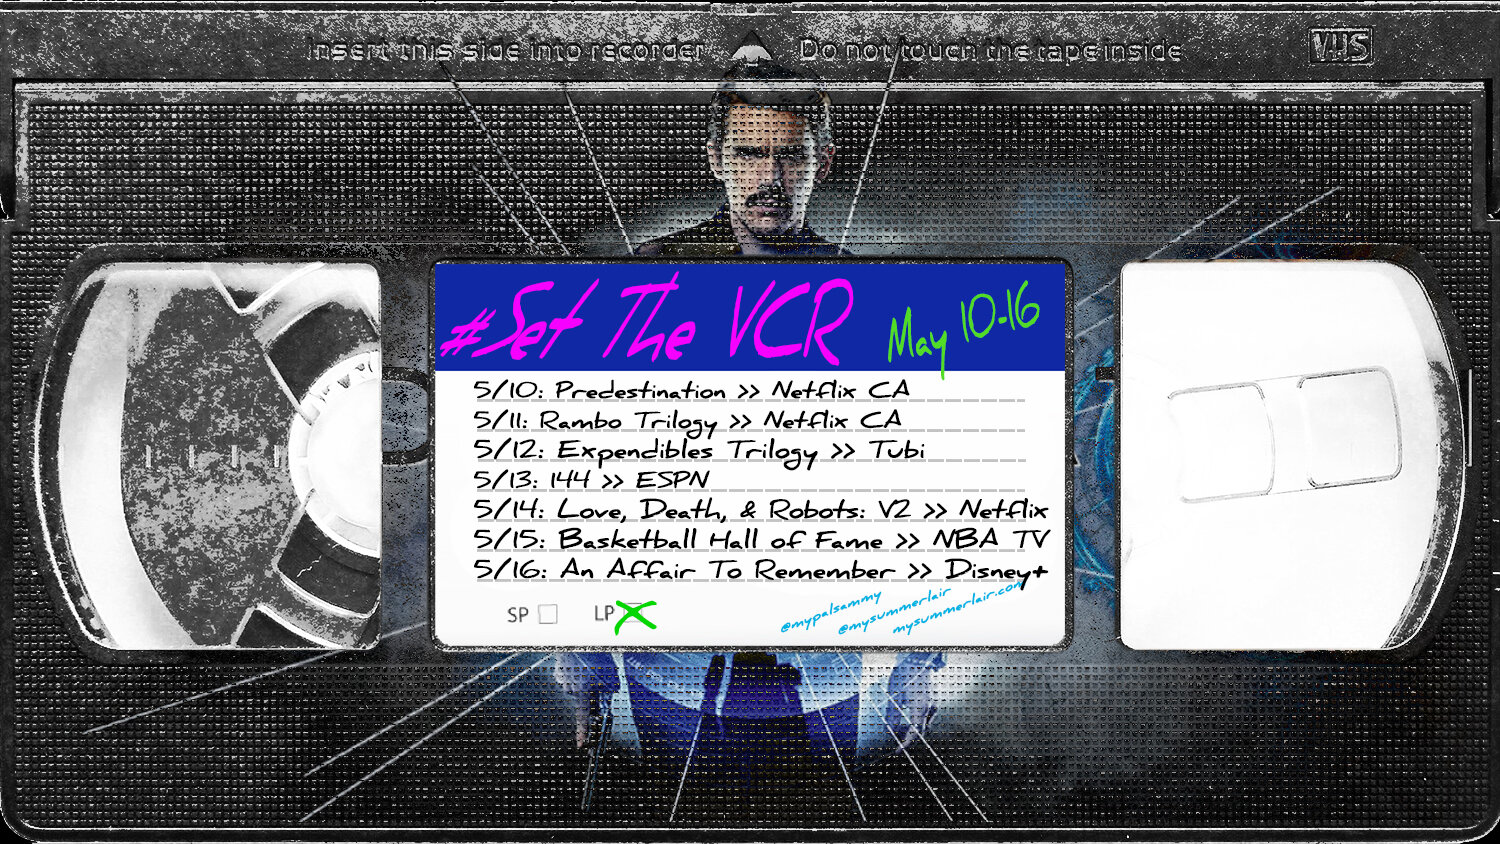 #SetTheVCR: May 10-16, 2021